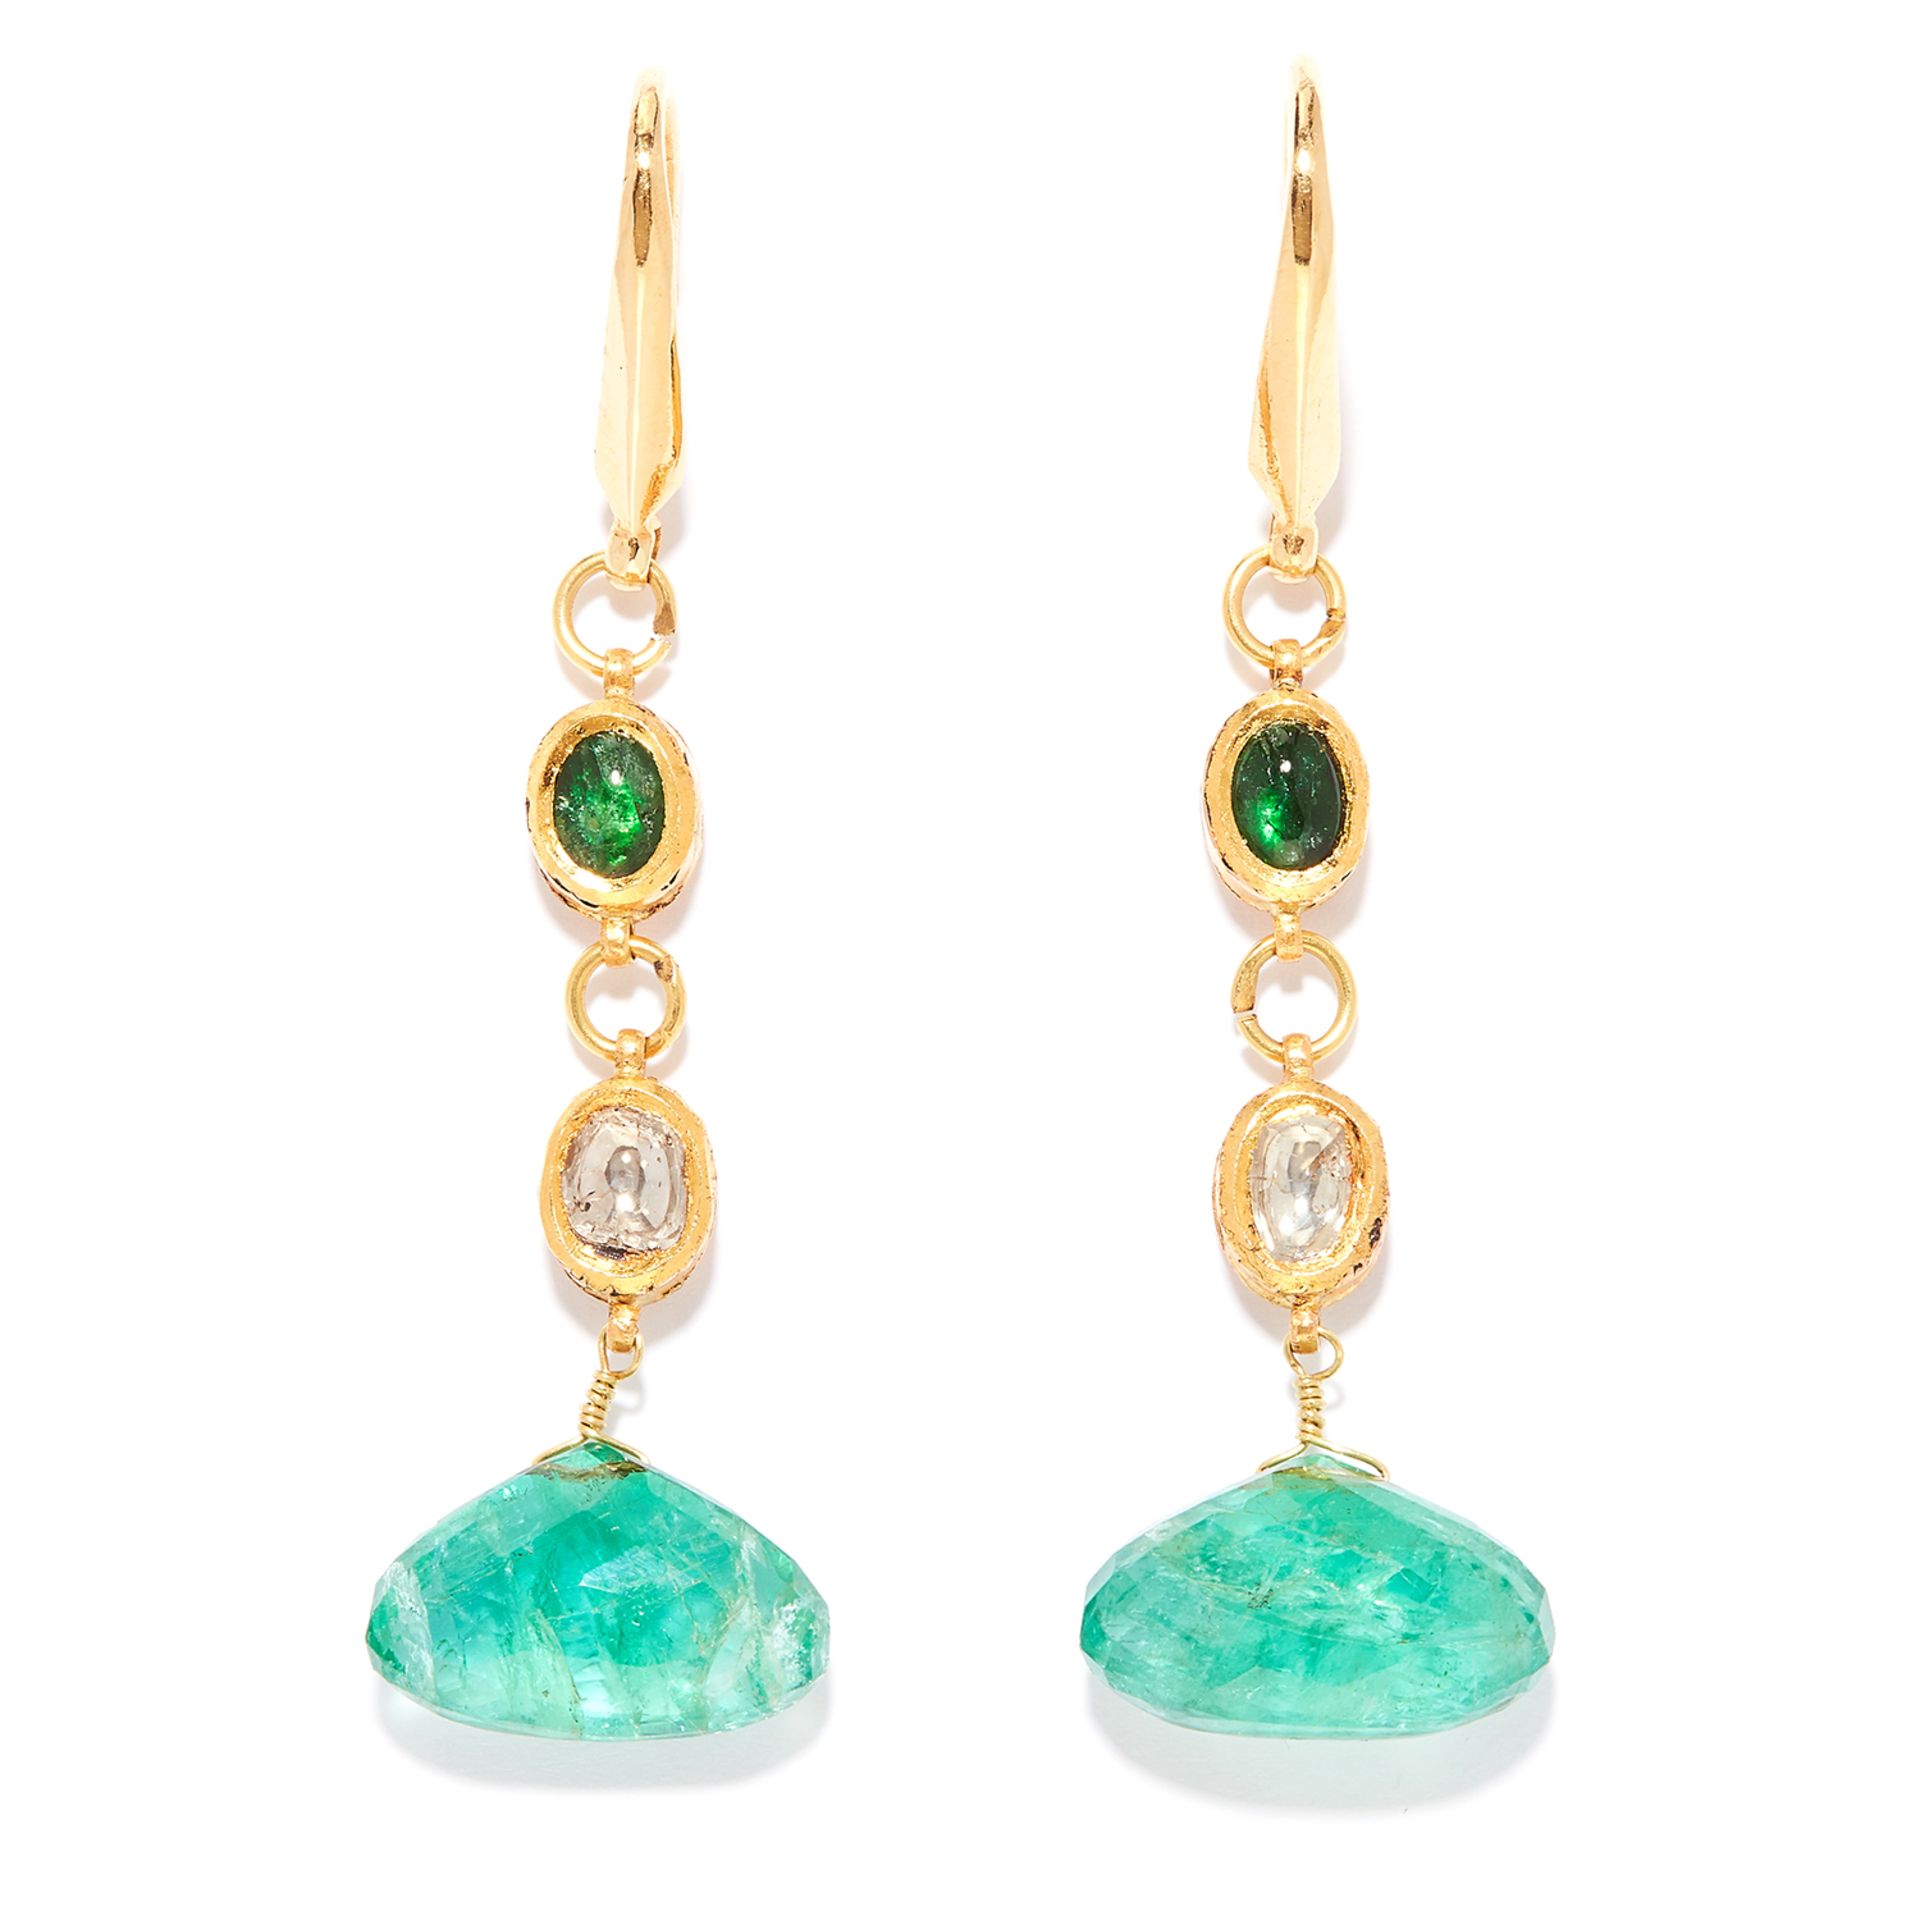 EMERALD AND DIAMOND DROP EARRINGS, INDIAN in high carat yellow gold, each comprising of a cabochon